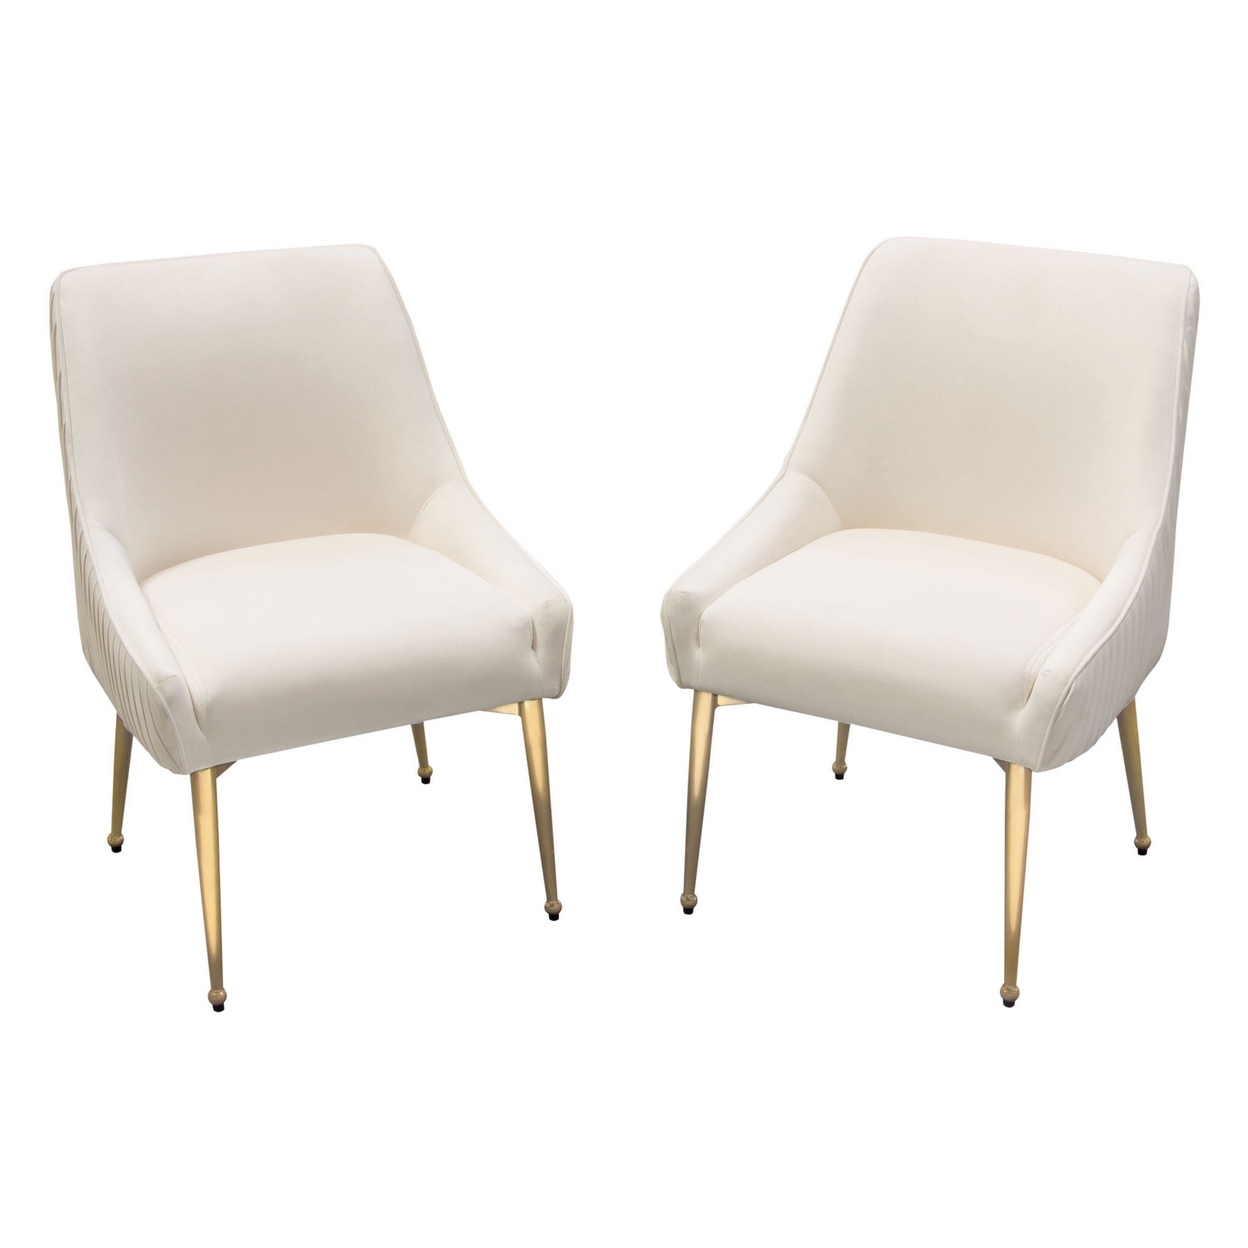 24 Inch Dining Chair, Set Of 2, Cushioned Seating, Sloped Arms, Off White- Saltoro Sherpi